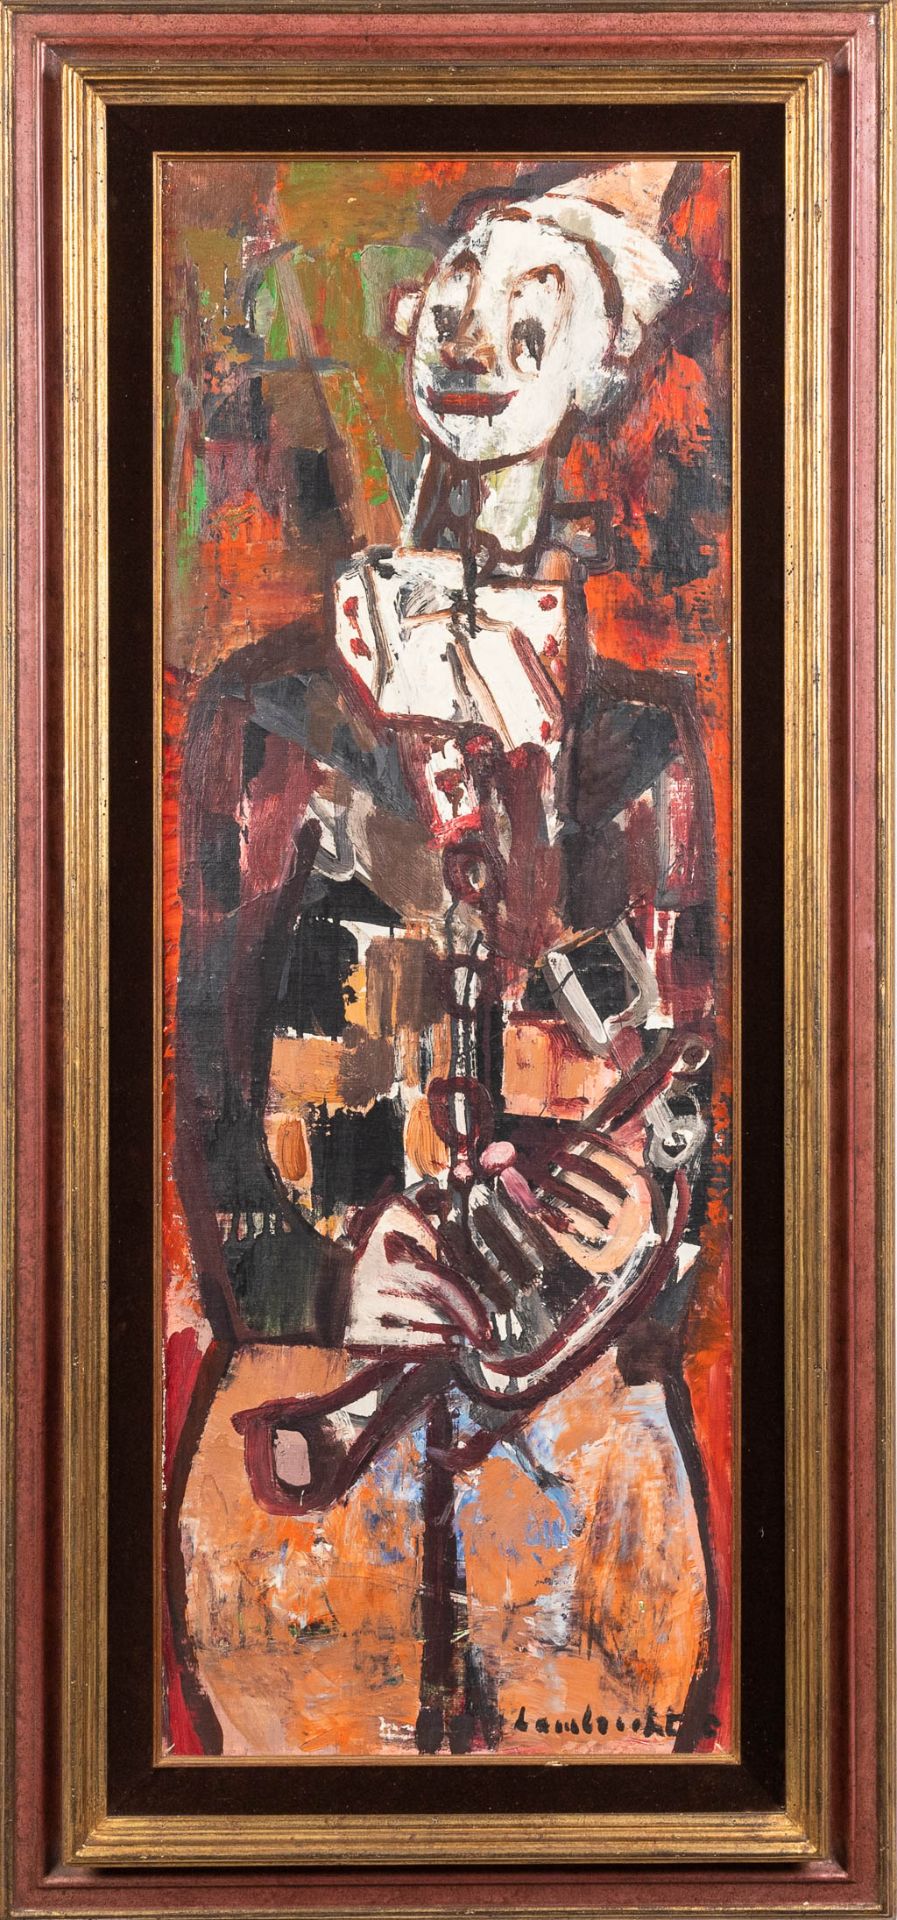 Constant LAMBRECHT (1915-1993) 'Expressionist Clown' oil on board. (W: 40 x H: 110 cm) - Image 3 of 7